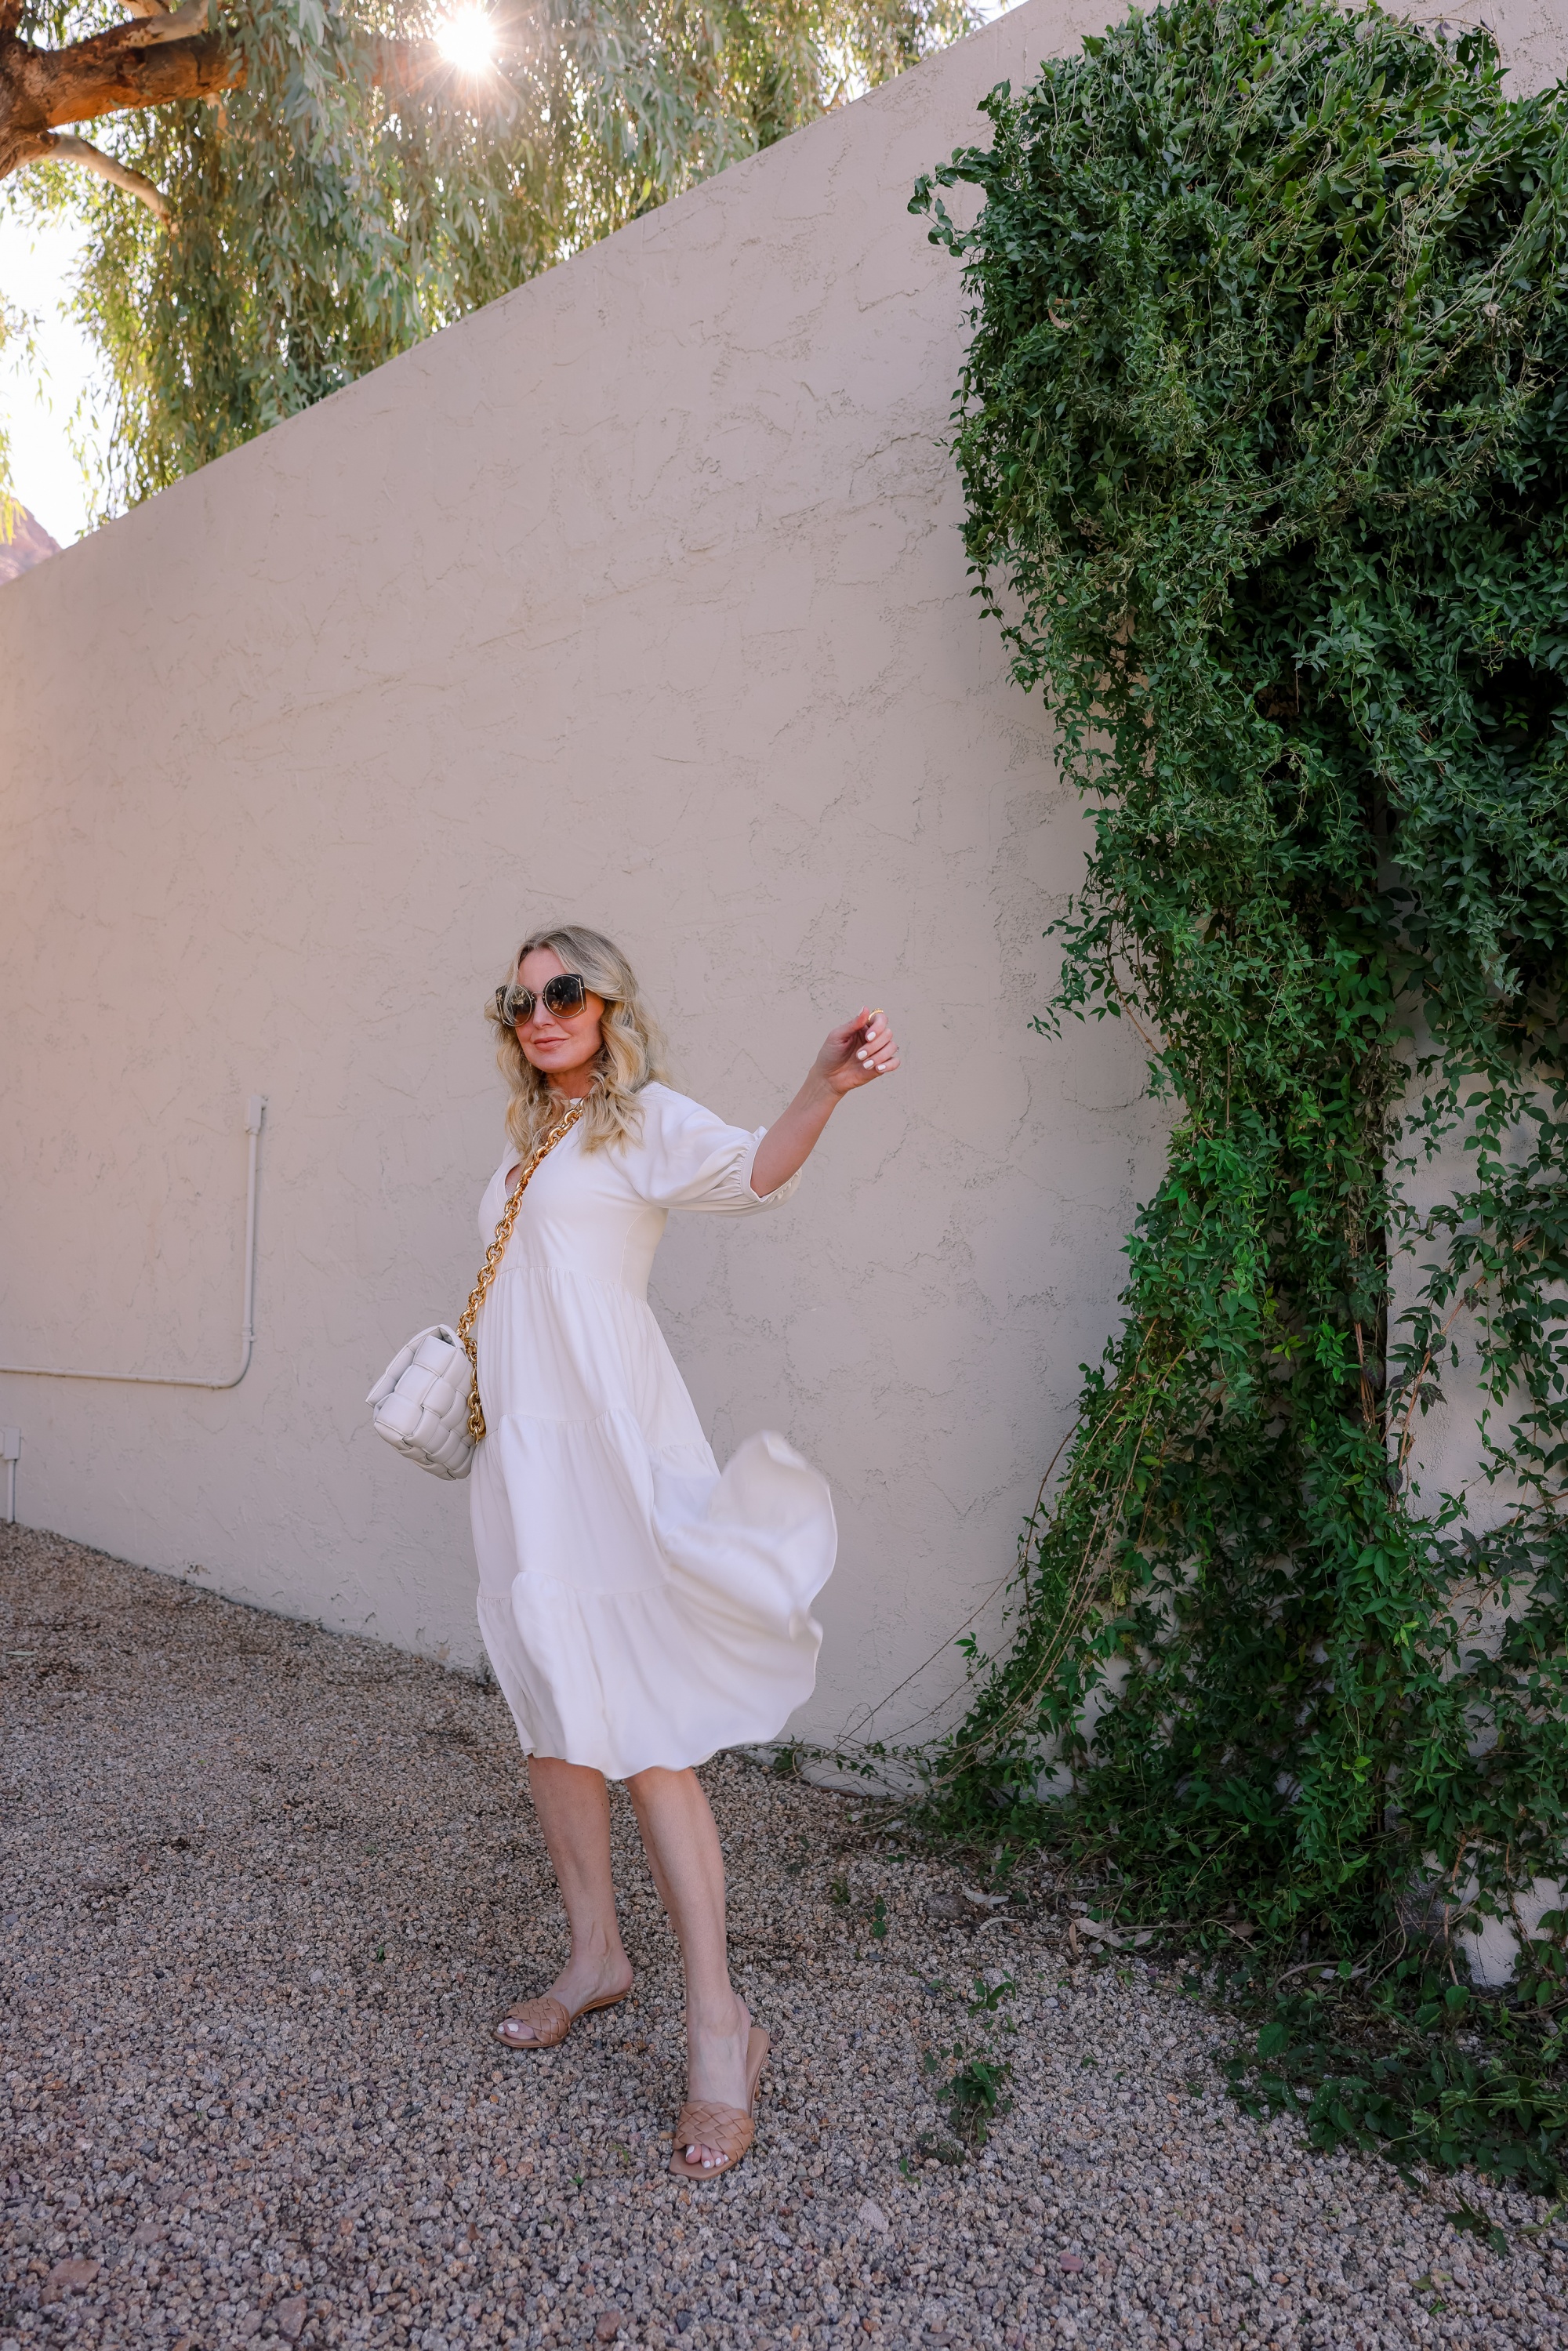 White dresses for spring! Featuring a beautiful white midi length white dress by Amanda Uprichard on fashion over 40 blogger Erin Busbee